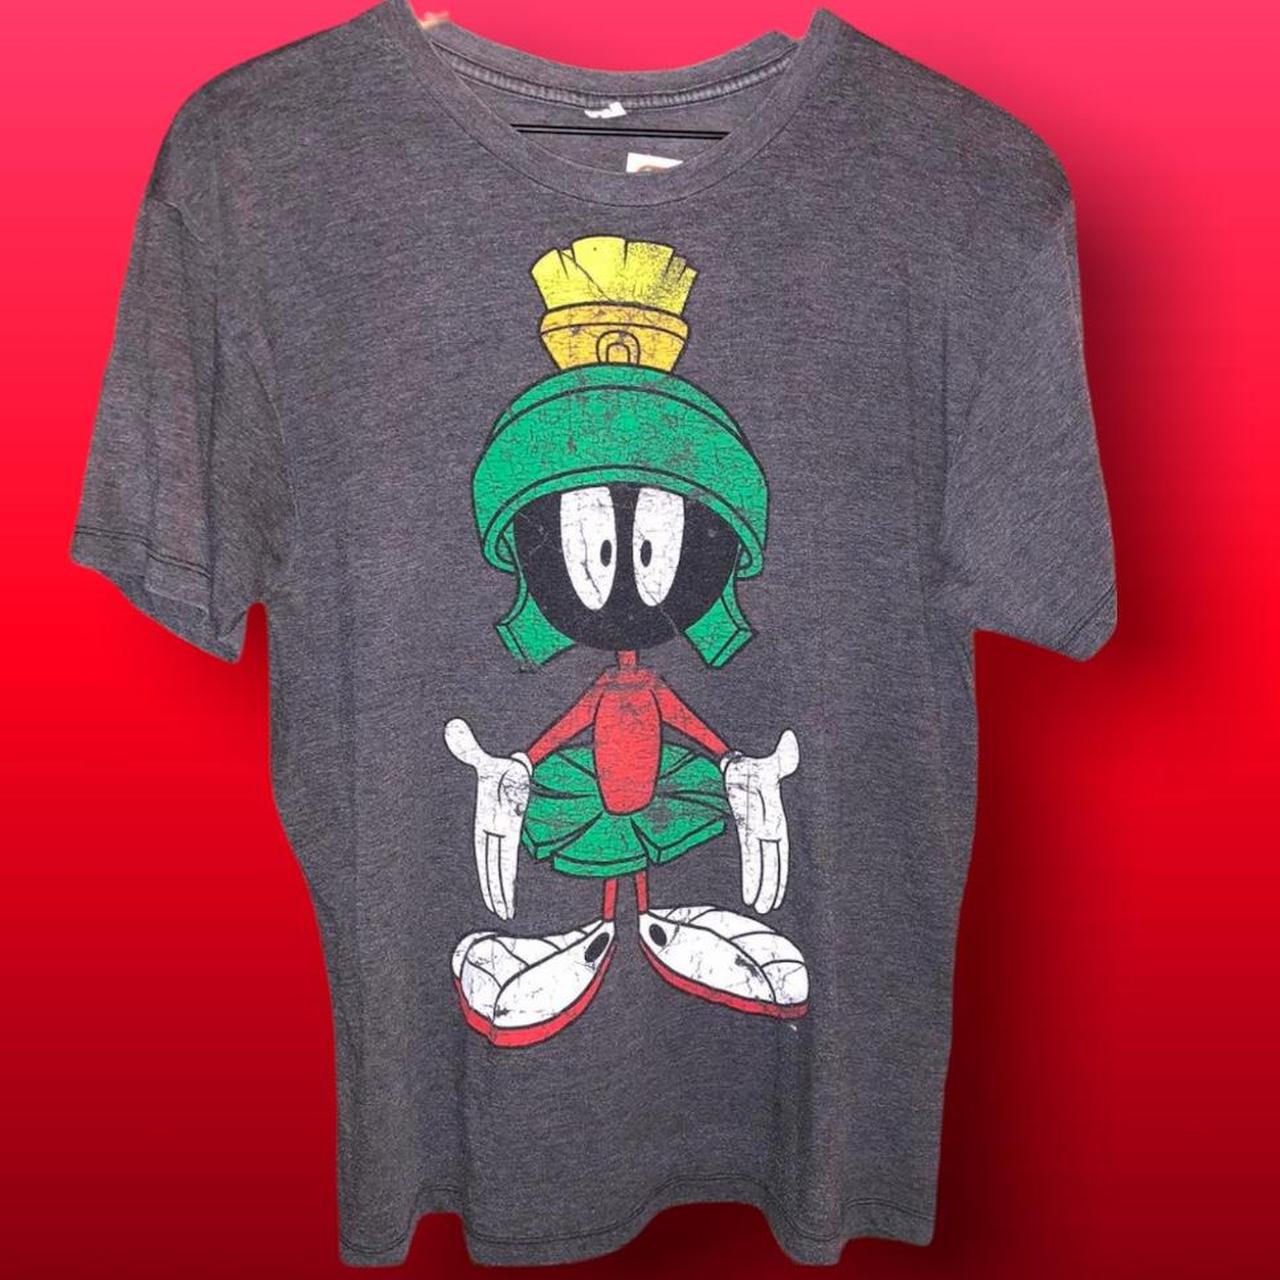 Vintage Marvin the Martian shirt Tag is ripped off... - Depop